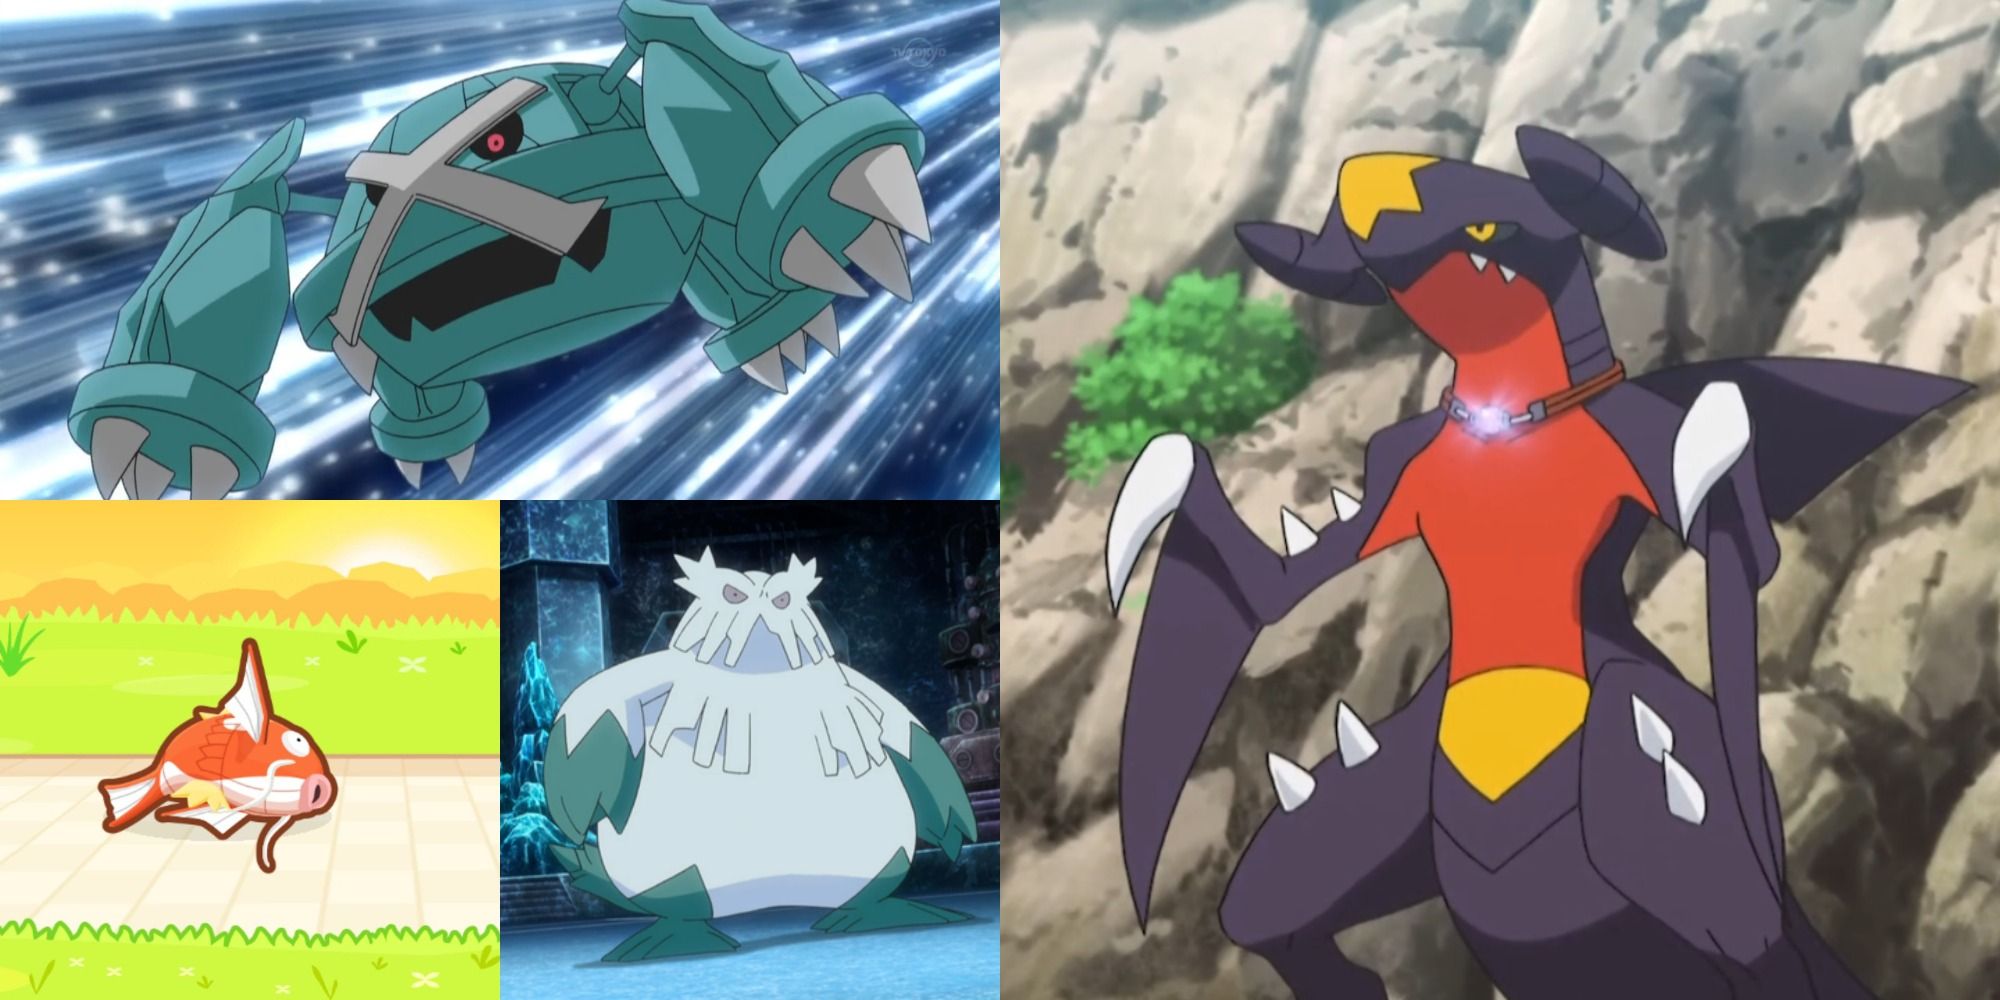 Collage of weakest and most powerful Pokemon